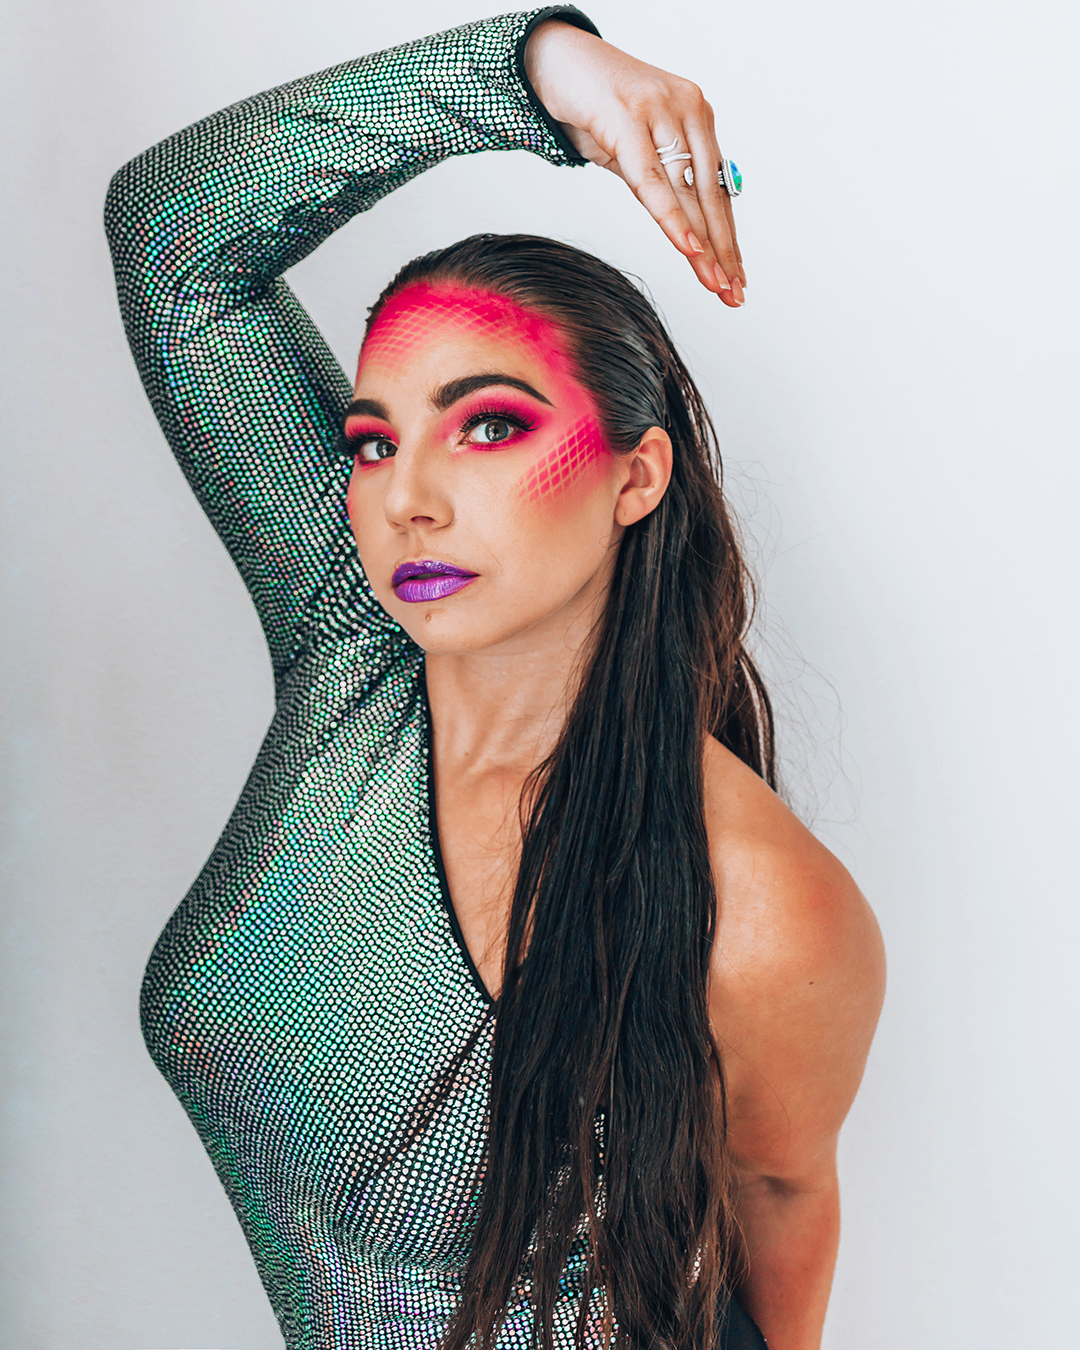 Fishnets create a scale effect with makeup for a DIY snake costume for Halloween 2020